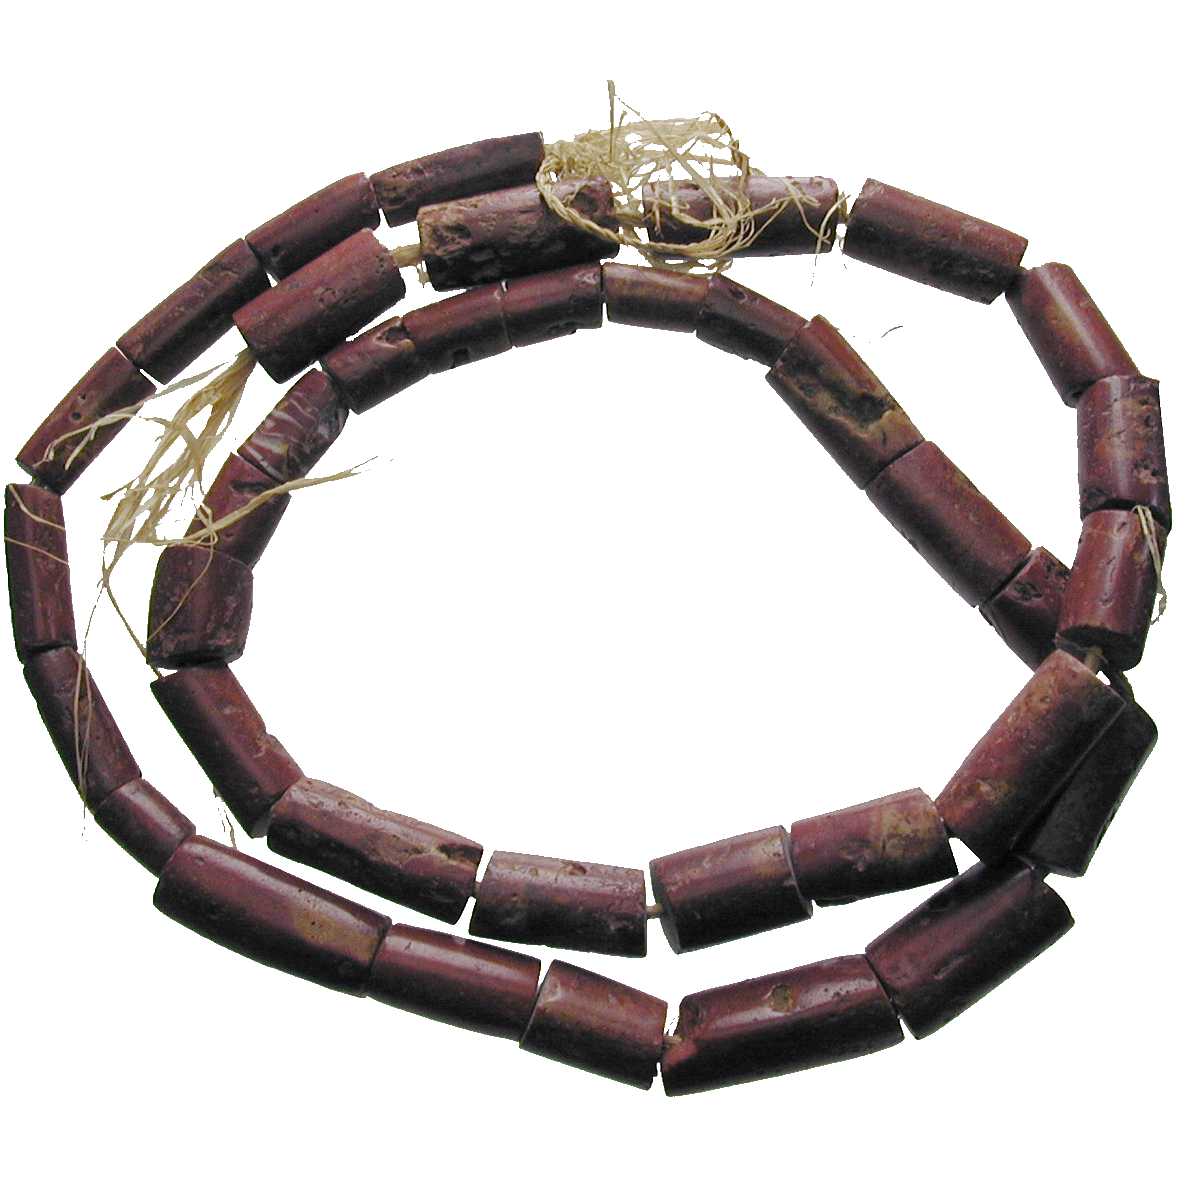 West Africa, Abo Bead (Bead of Bauxite) (obverse)